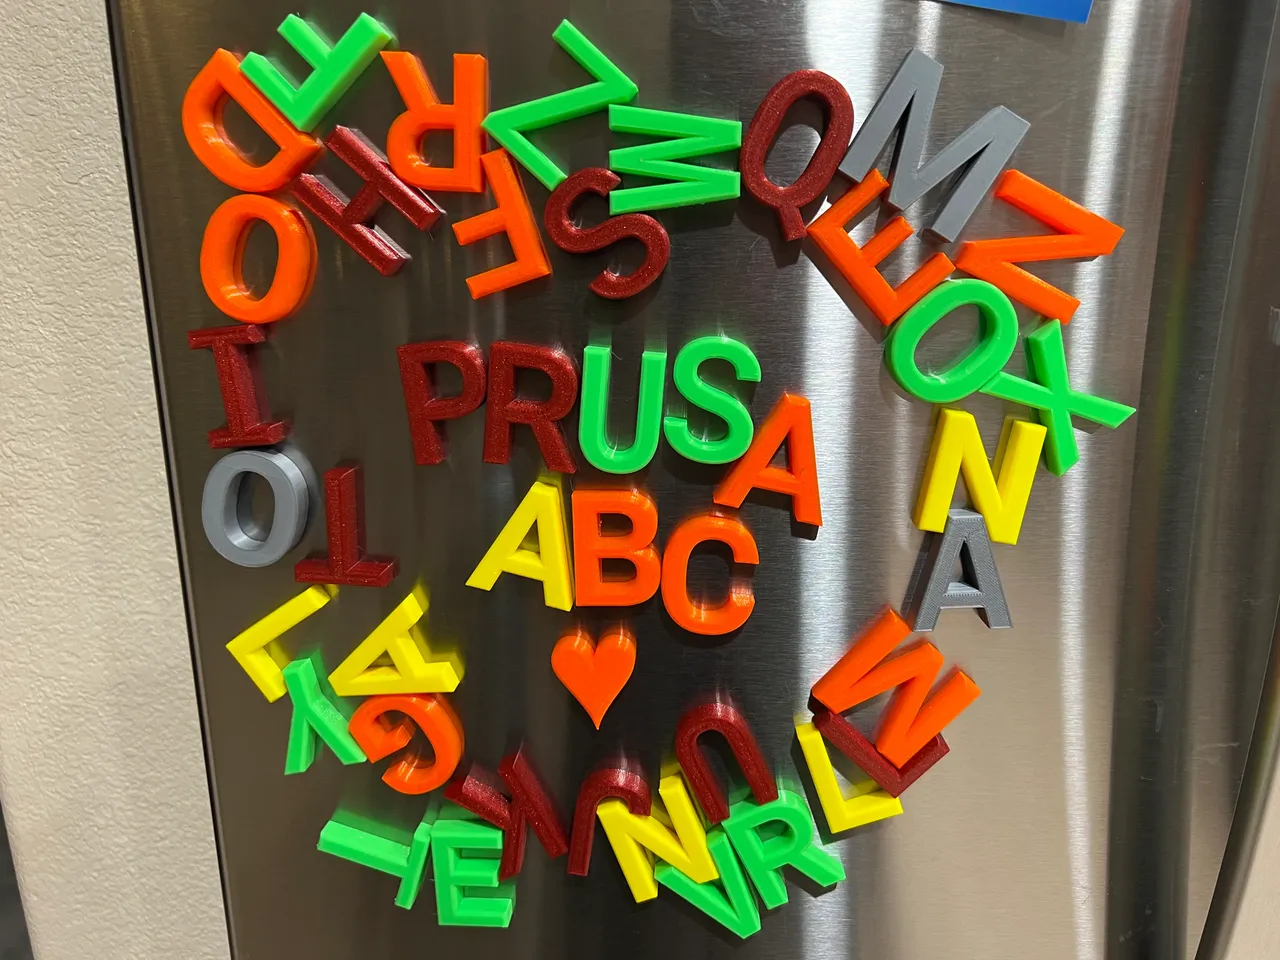 Magnetic Letters - Refrigerator Alphabet Magnets by Kyle Falconer